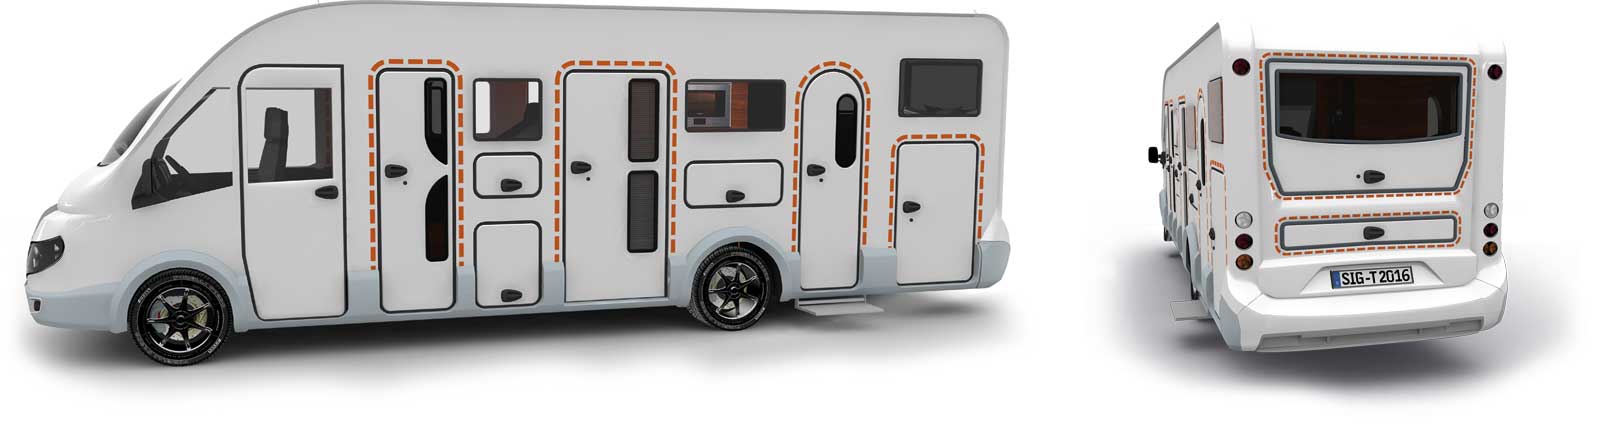 Satisfied tegos customers with miscellaneous caravans and RVs